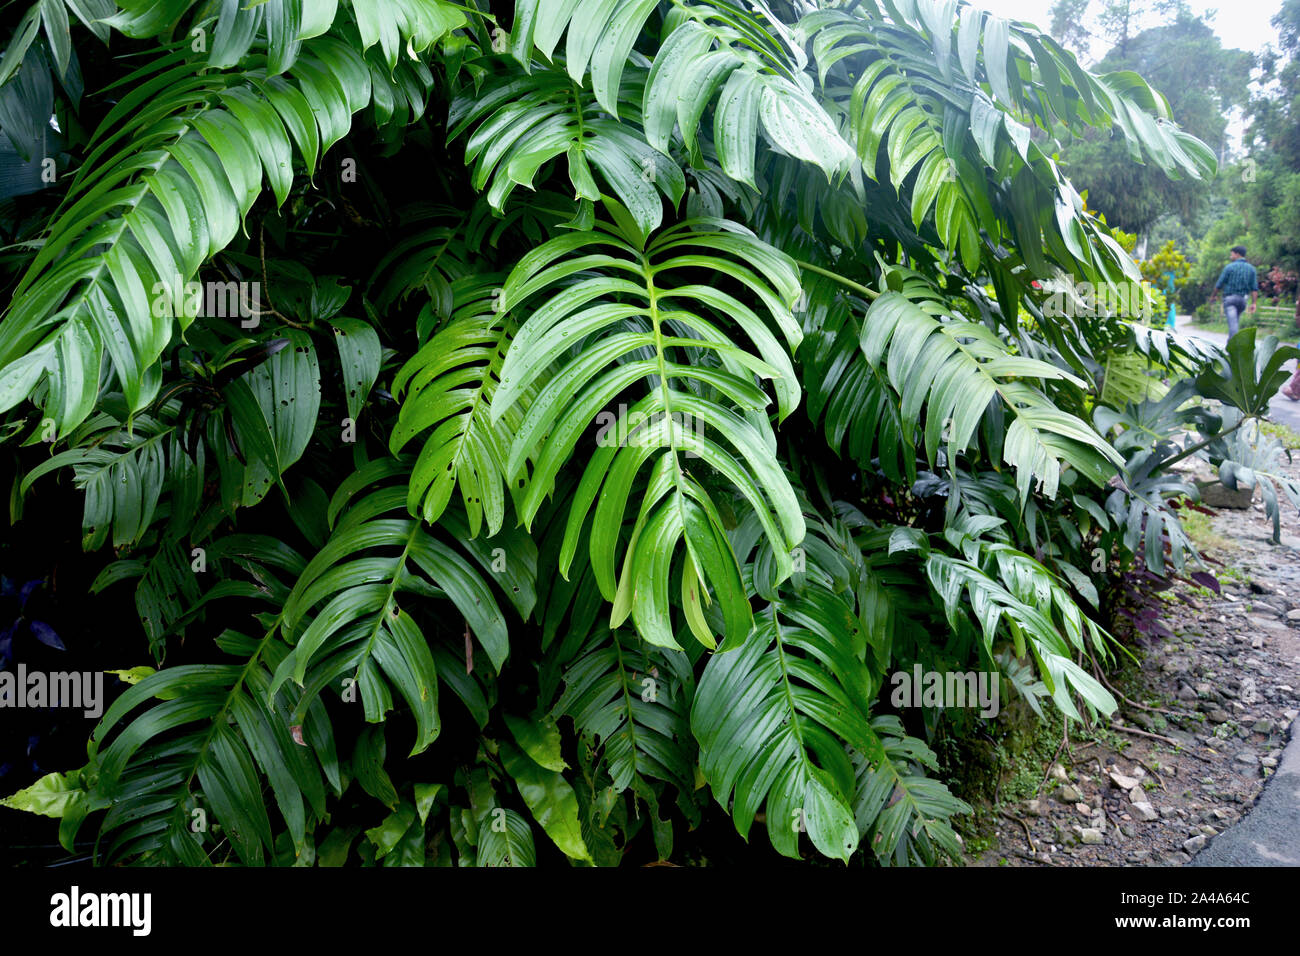 Large green leaves of monstera plants growing heart shaped or split-leaf philodendron (Monstera deliciosa) the tropical foliage plant in mawlynnong Stock Photo